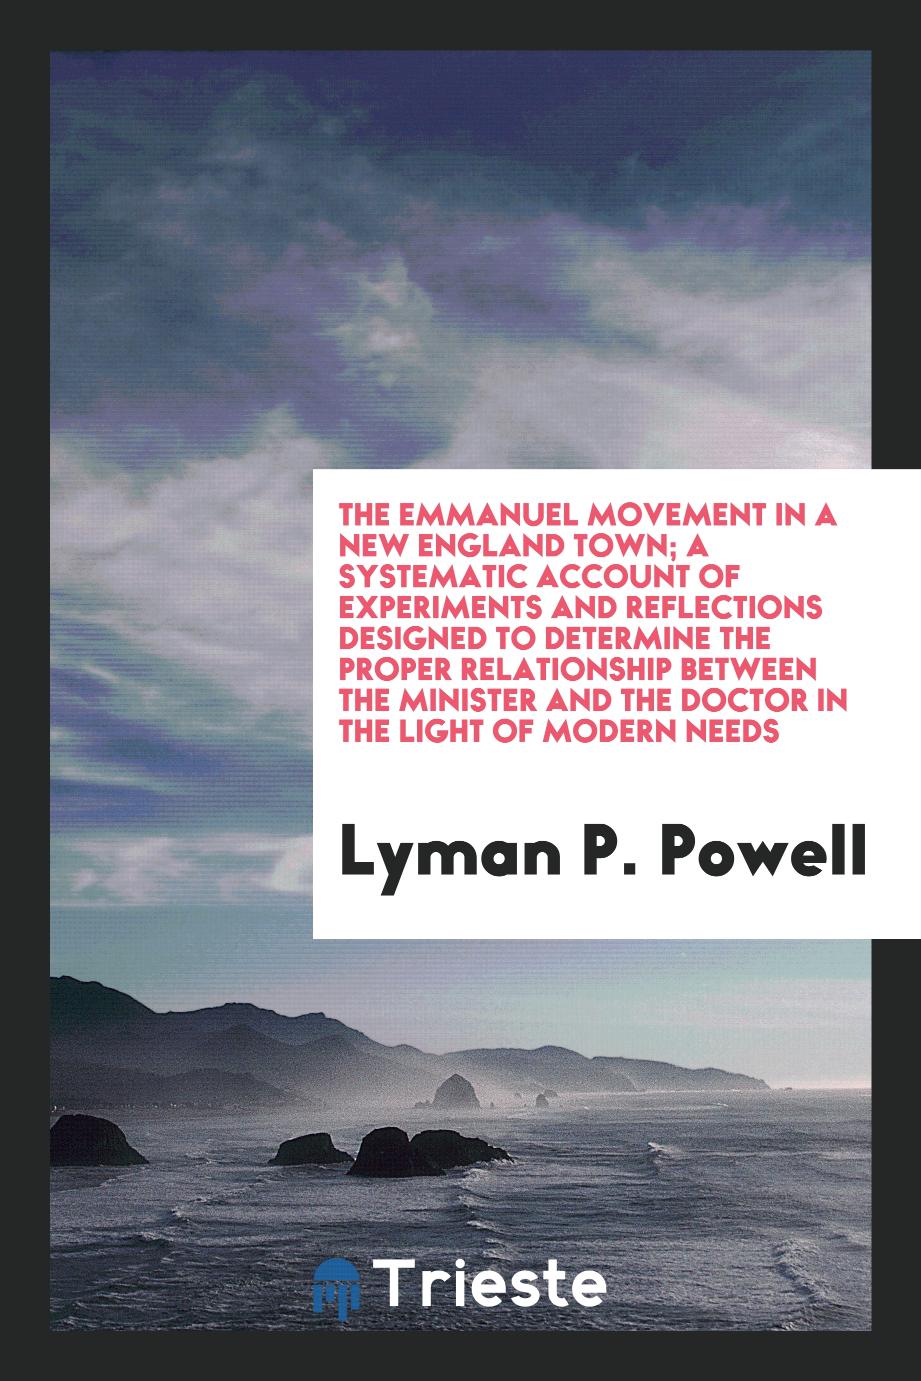 The Emmanuel movement in a New England town; a systematic account of Experiments and reflections designed to determine the proper relationship between the minister and the doctor in the light of modern needs